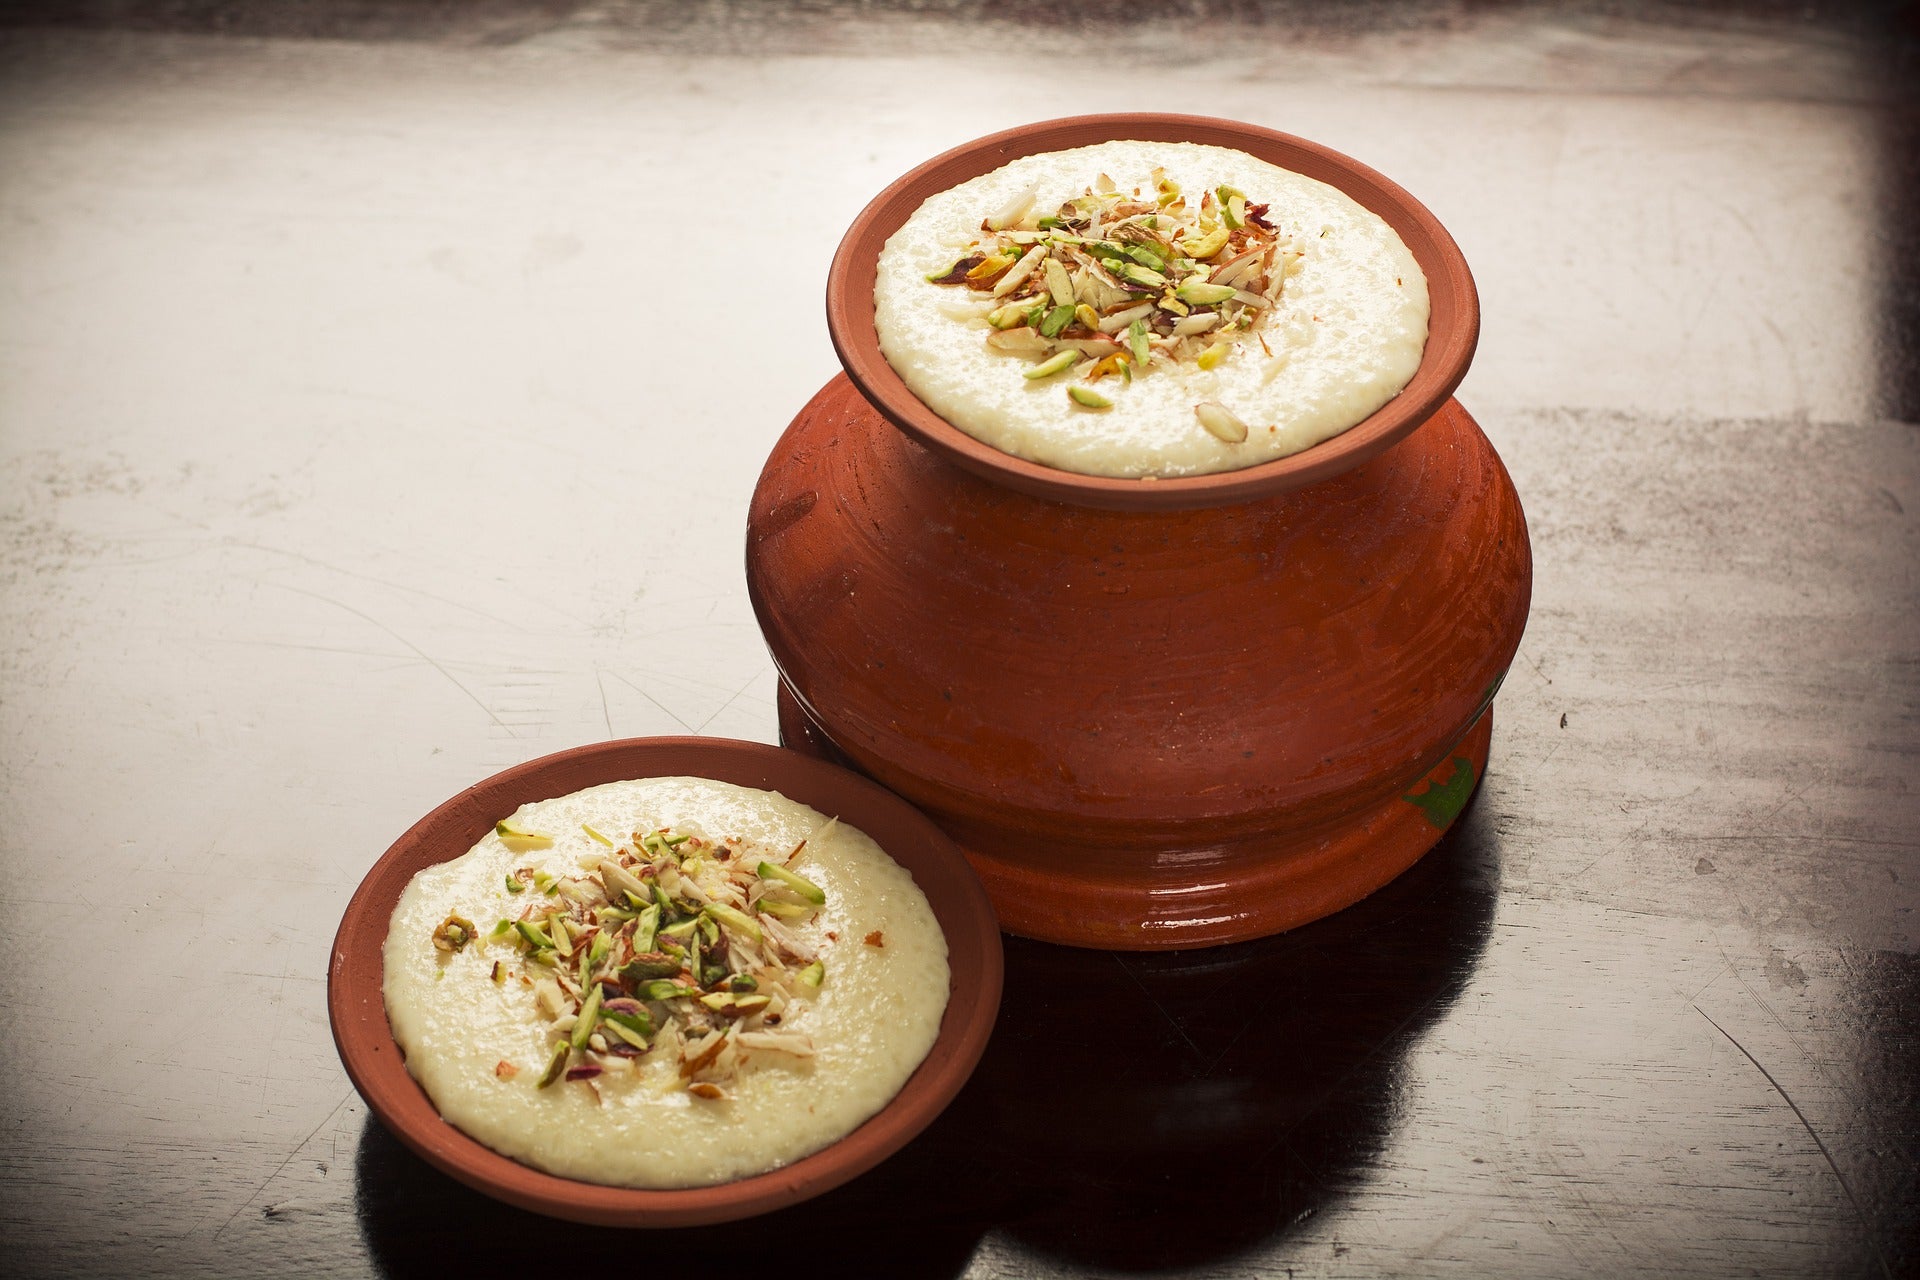 Warm Konjac Rice Pudding Recipe And Cooking Guide